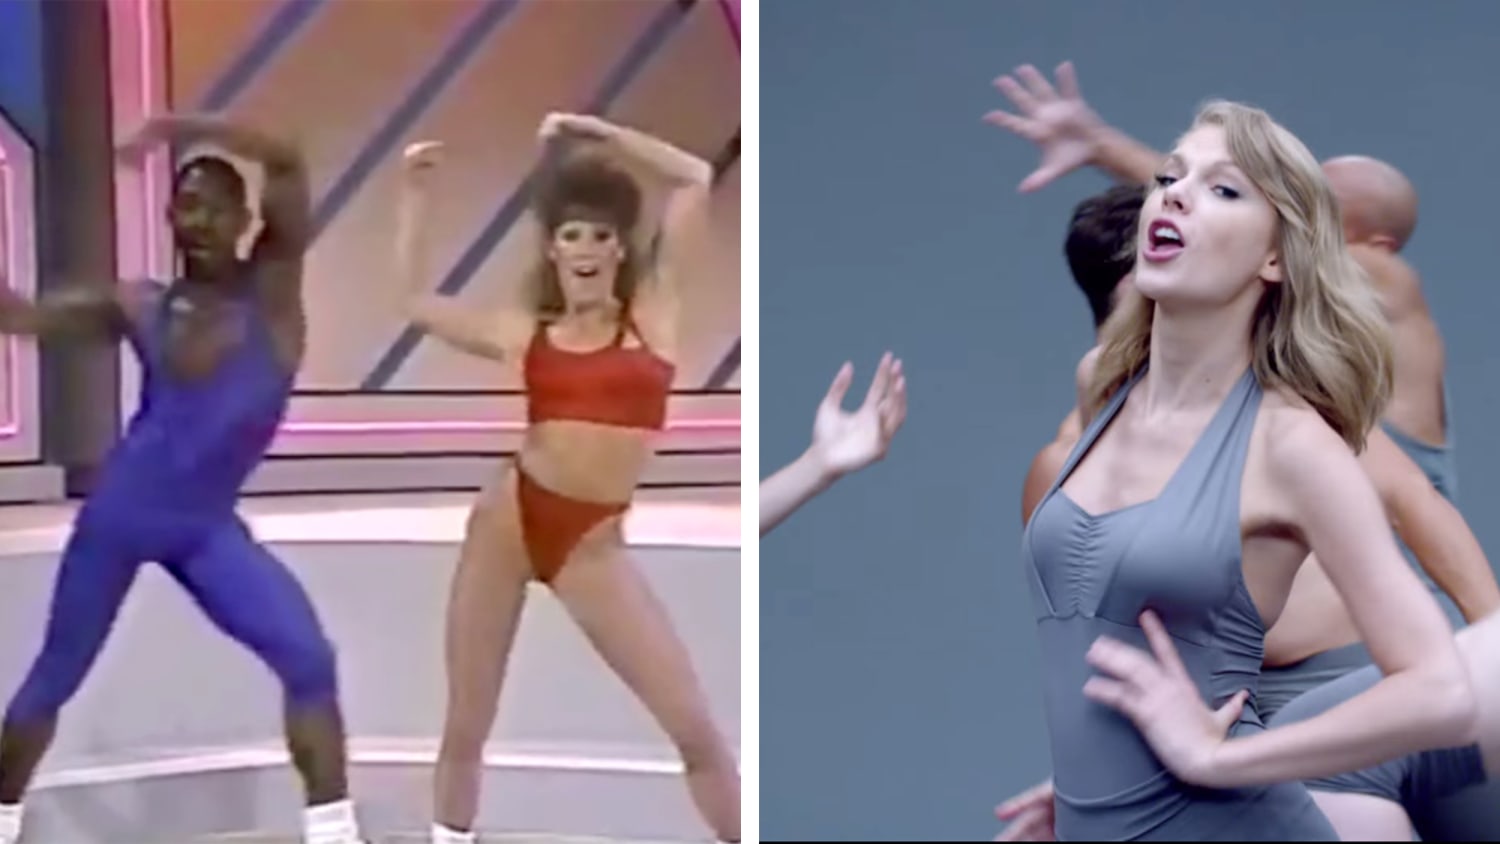 Taylor Swift tune 'Shake it Off' syncs with 1989 aerobic video